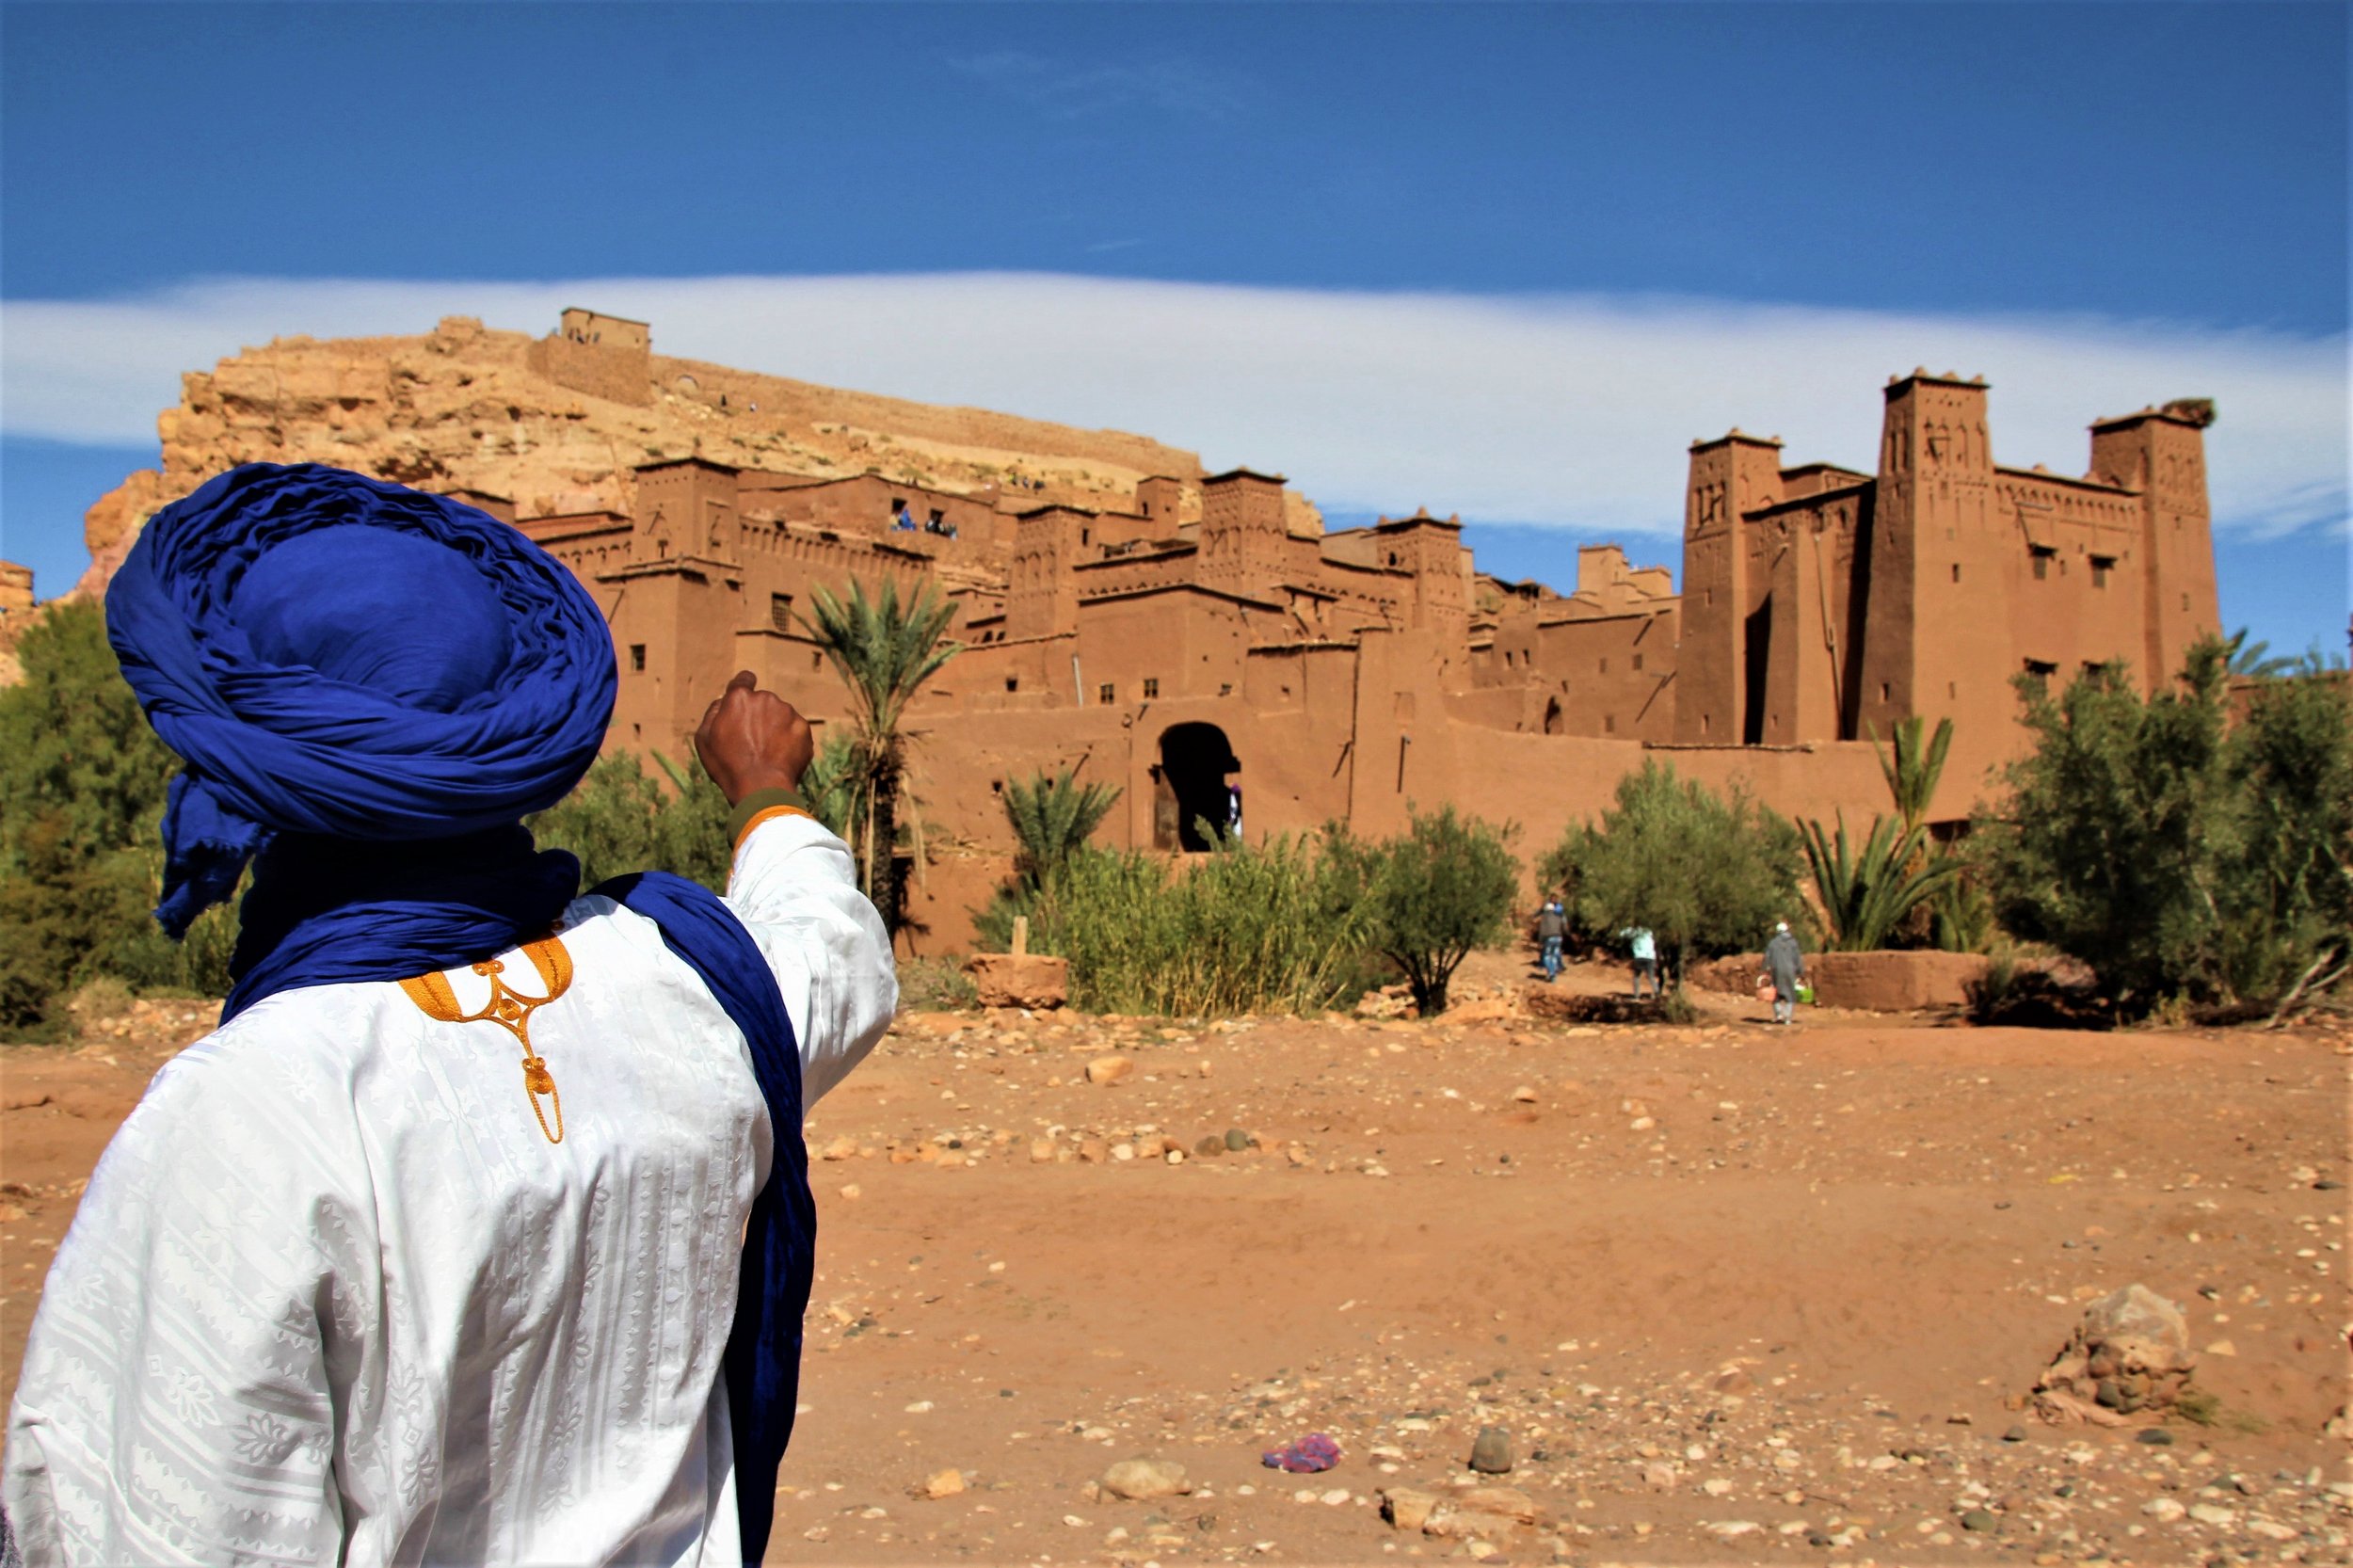 guide pointing out features of Ouarzazate in Morocco.jpg